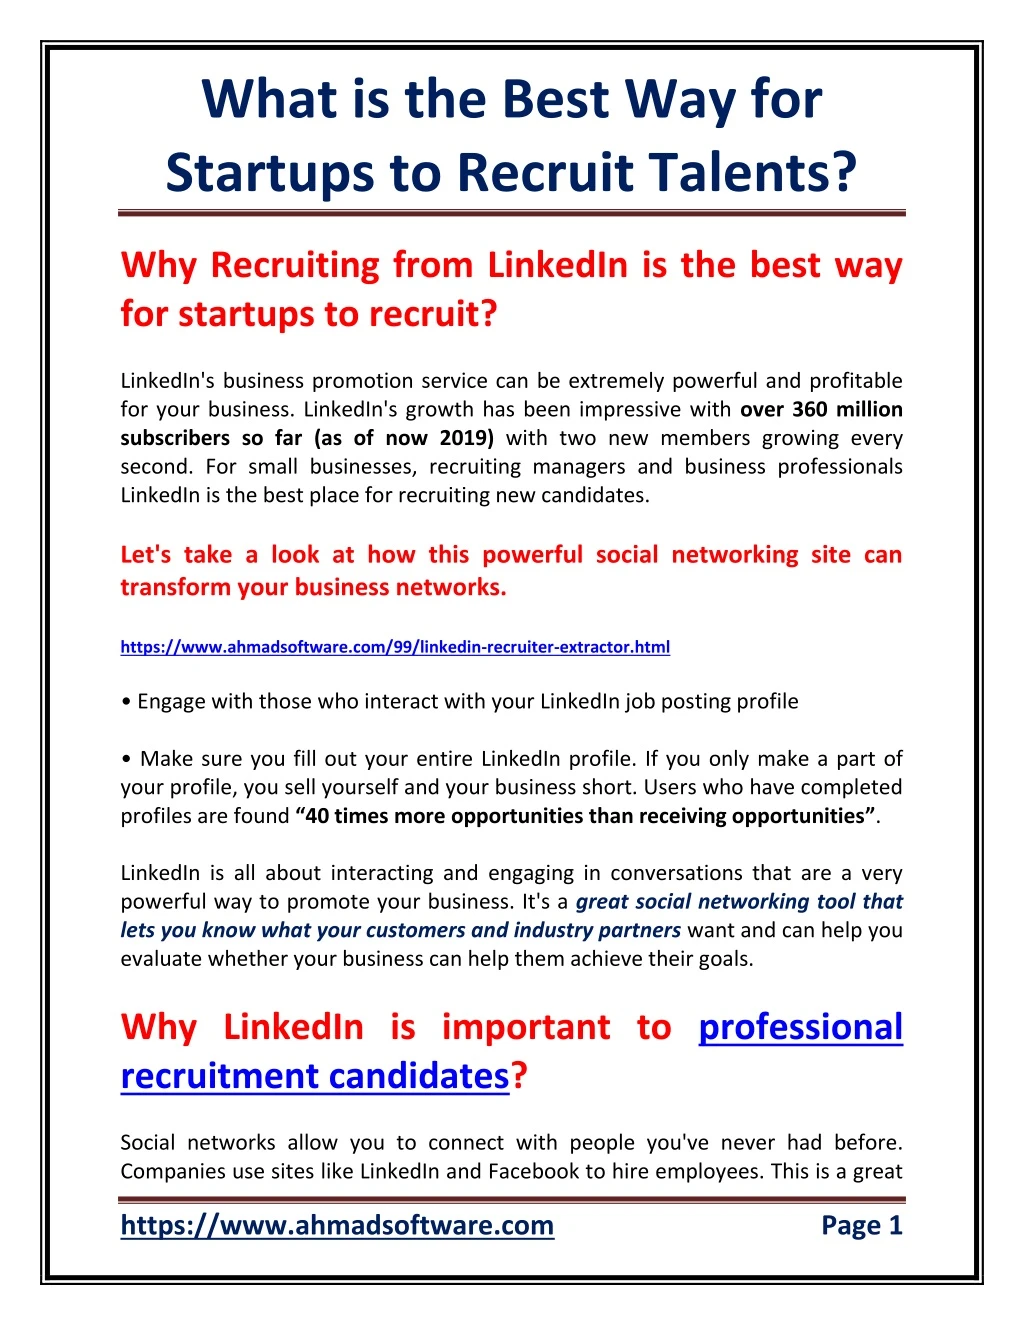 what is the best way for startups to recruit